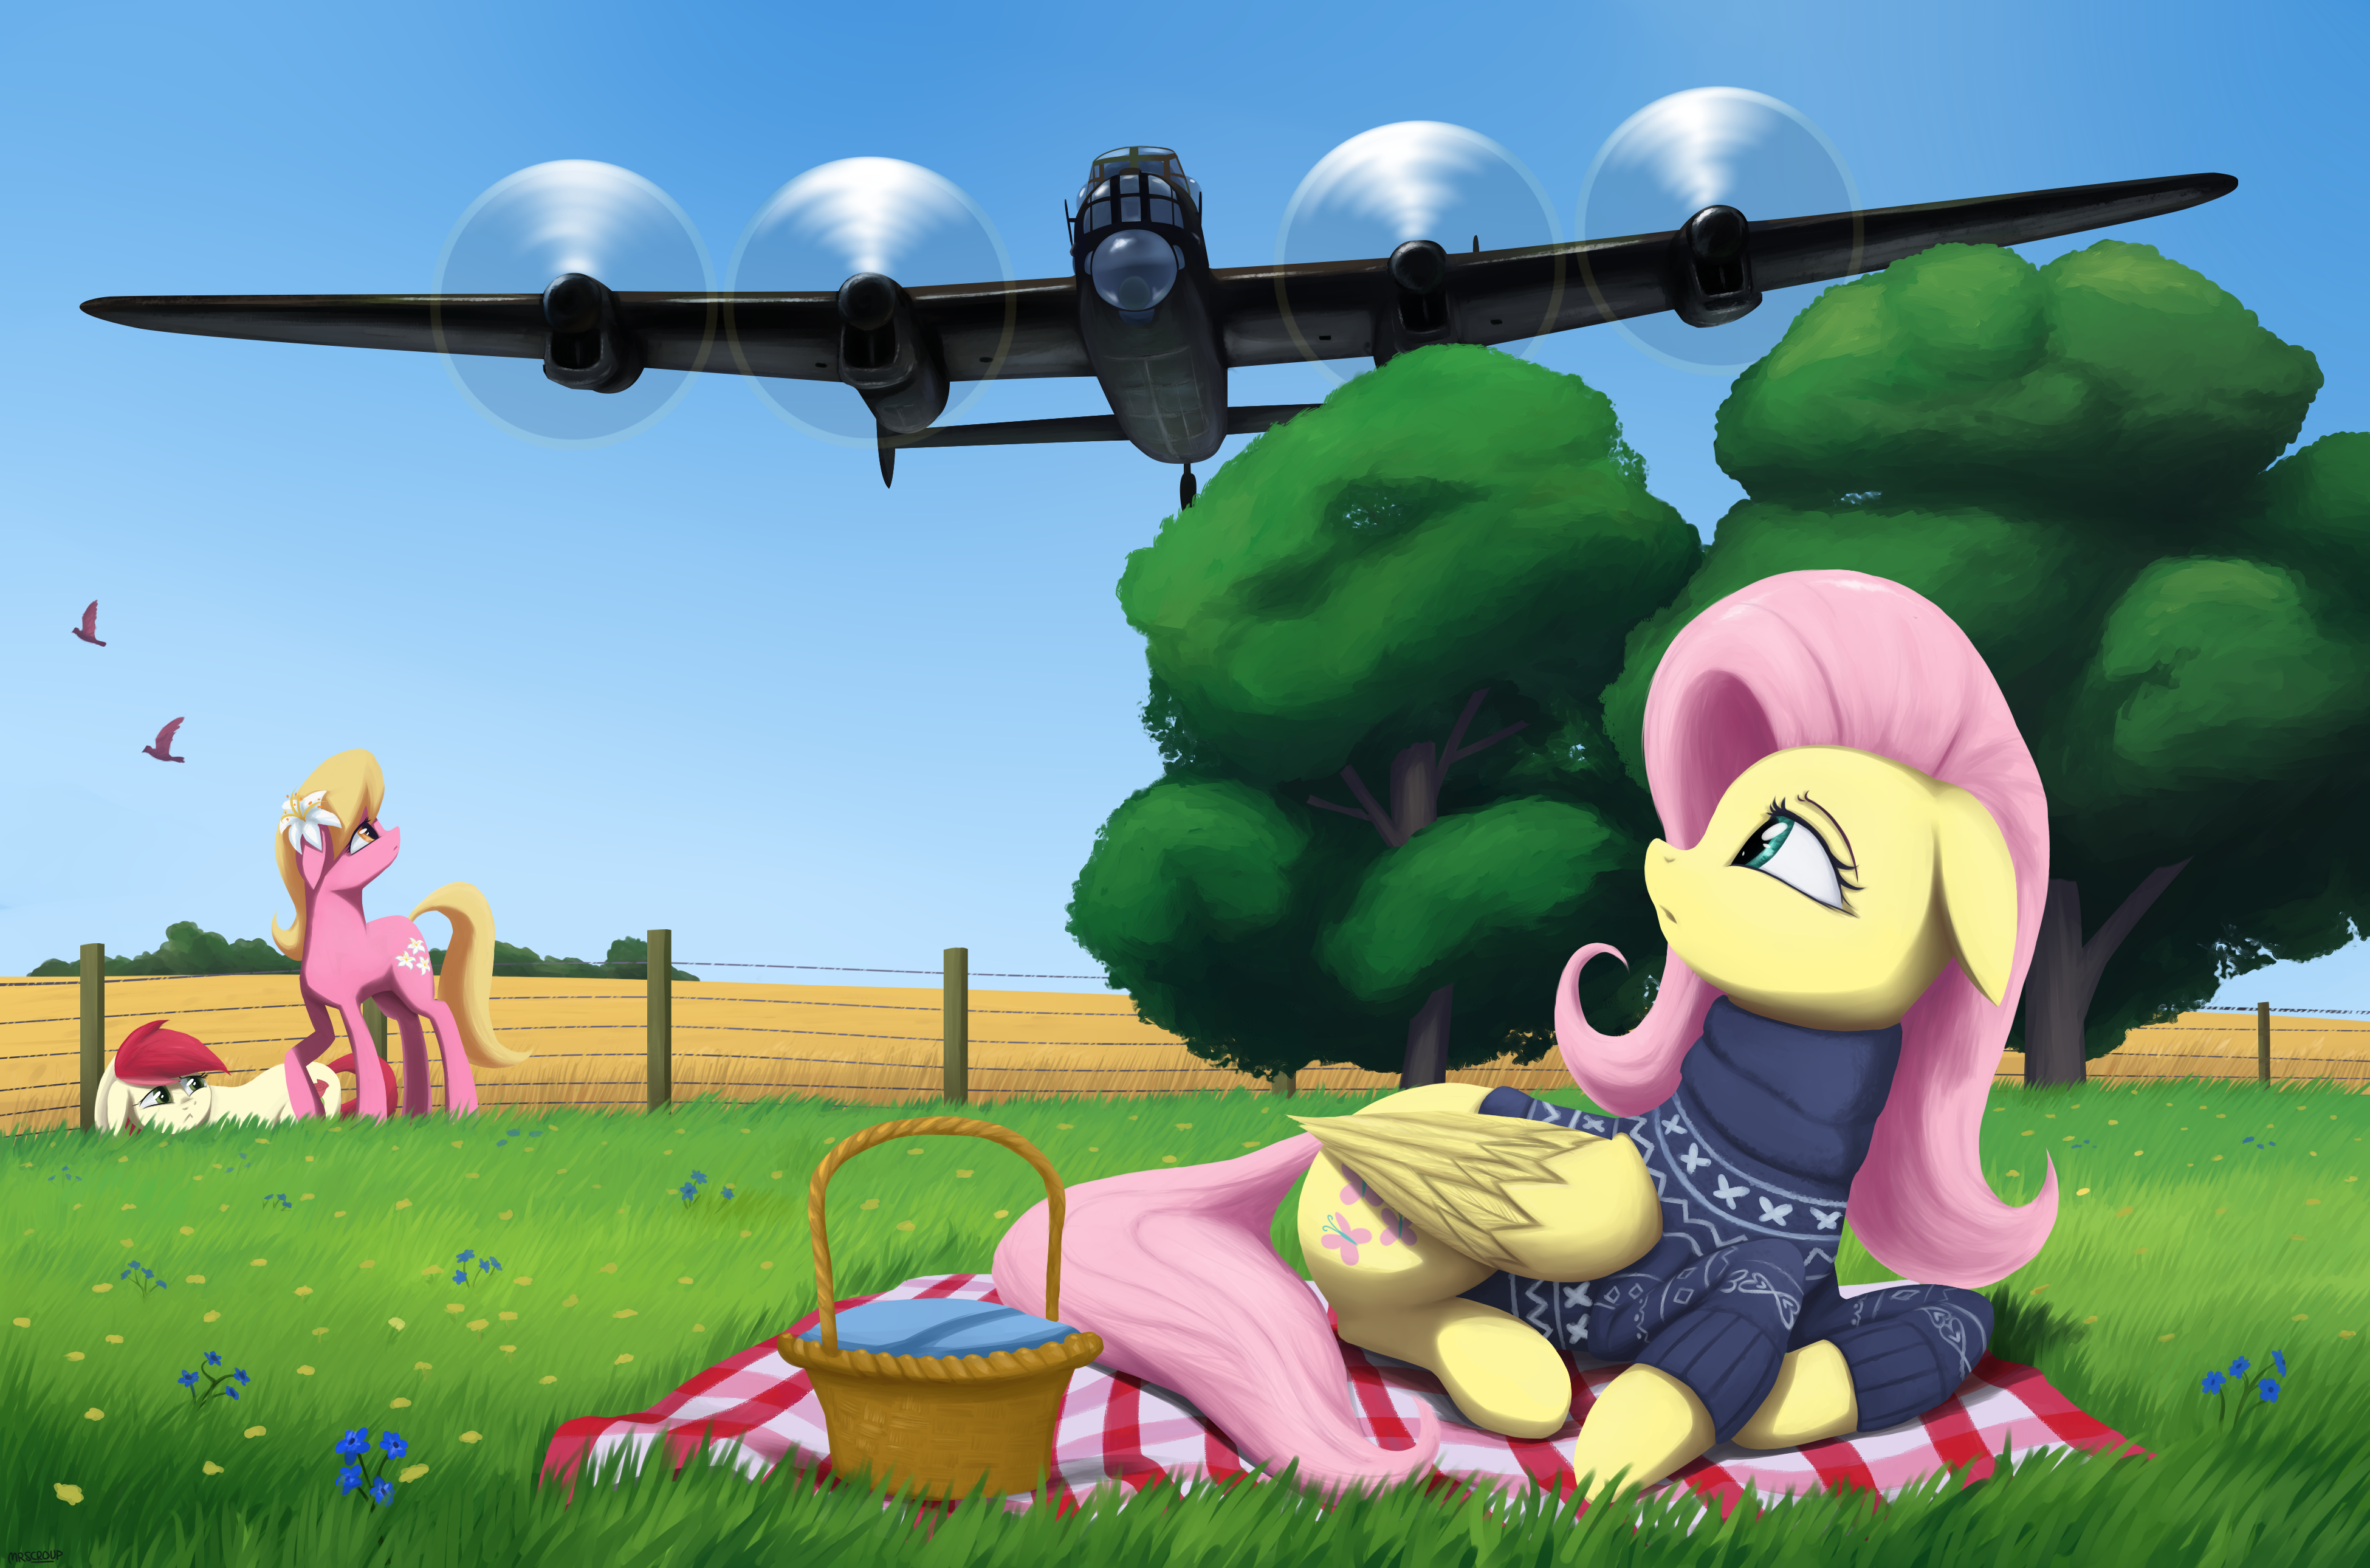 training_flights_by_mrscroup-d92wsyp.png